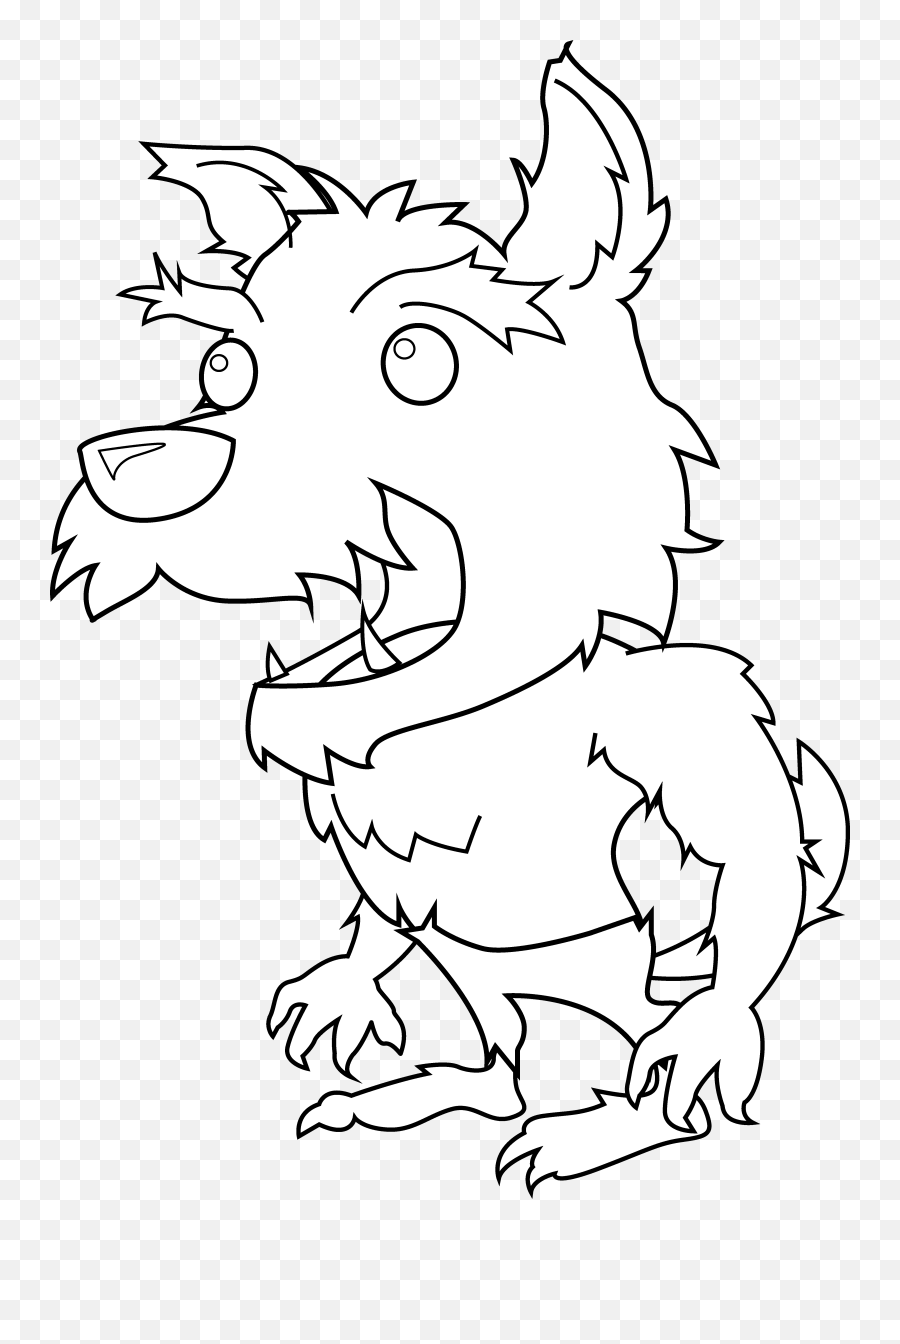 Scary Little Werewolf Coloring Page - Werewolves Clipart Black And White Emoji,Werewolf Clipart